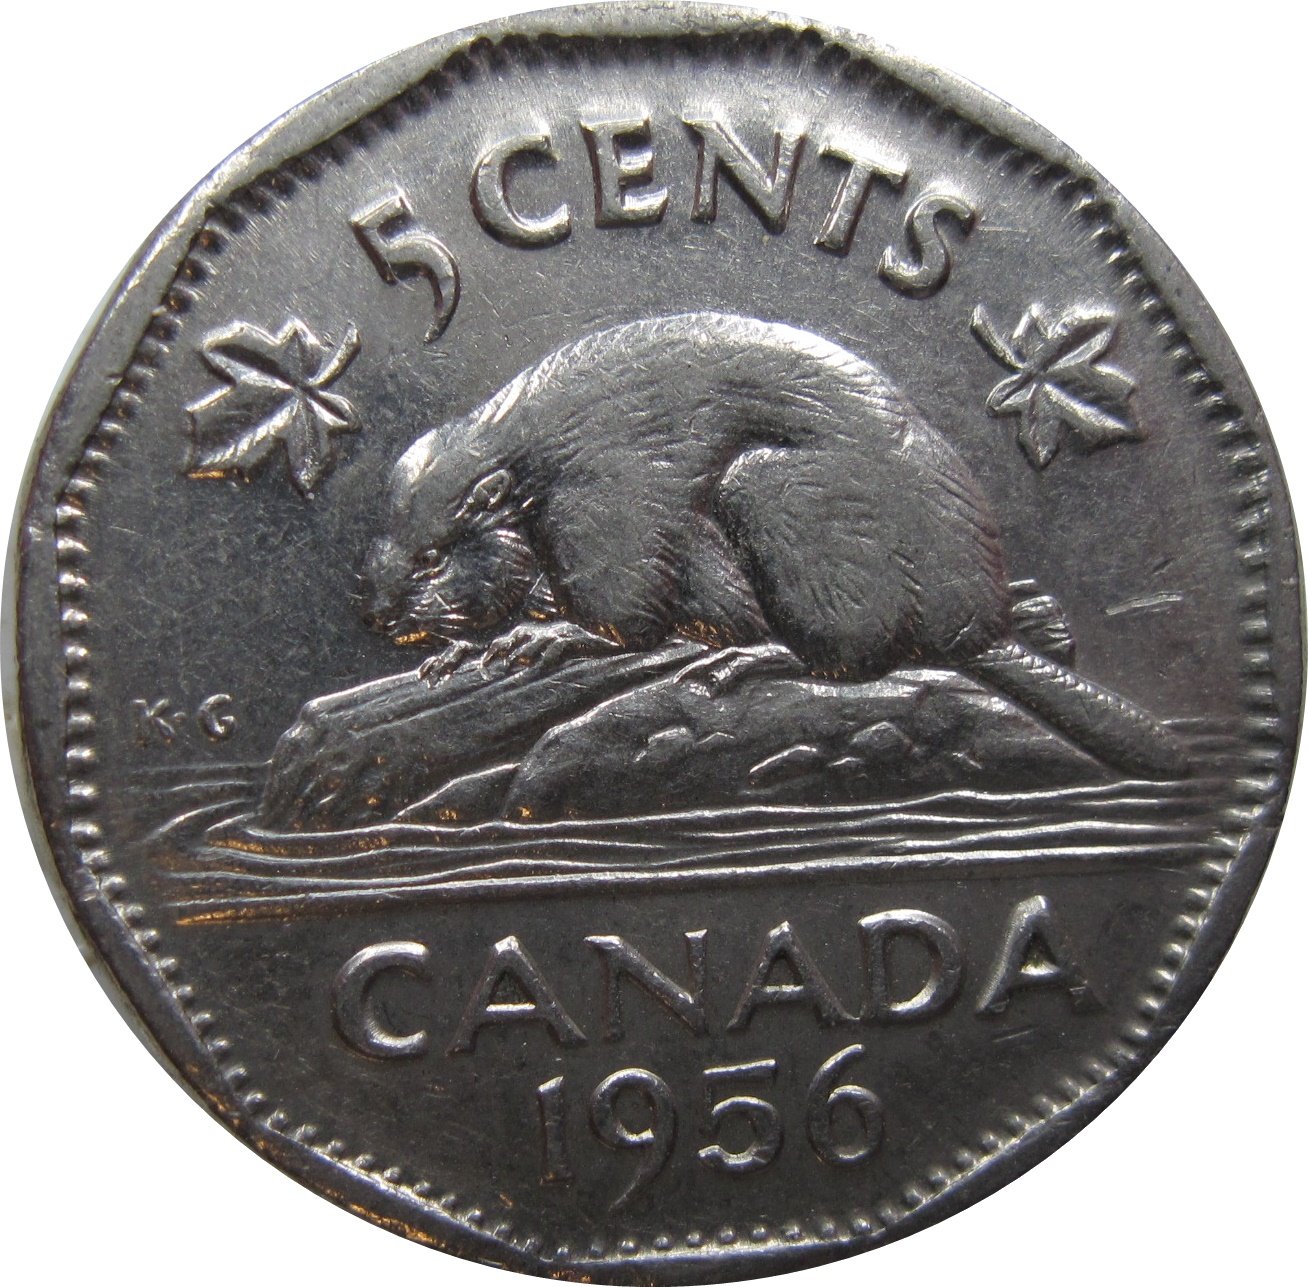 1956 Canadian 5 Cent